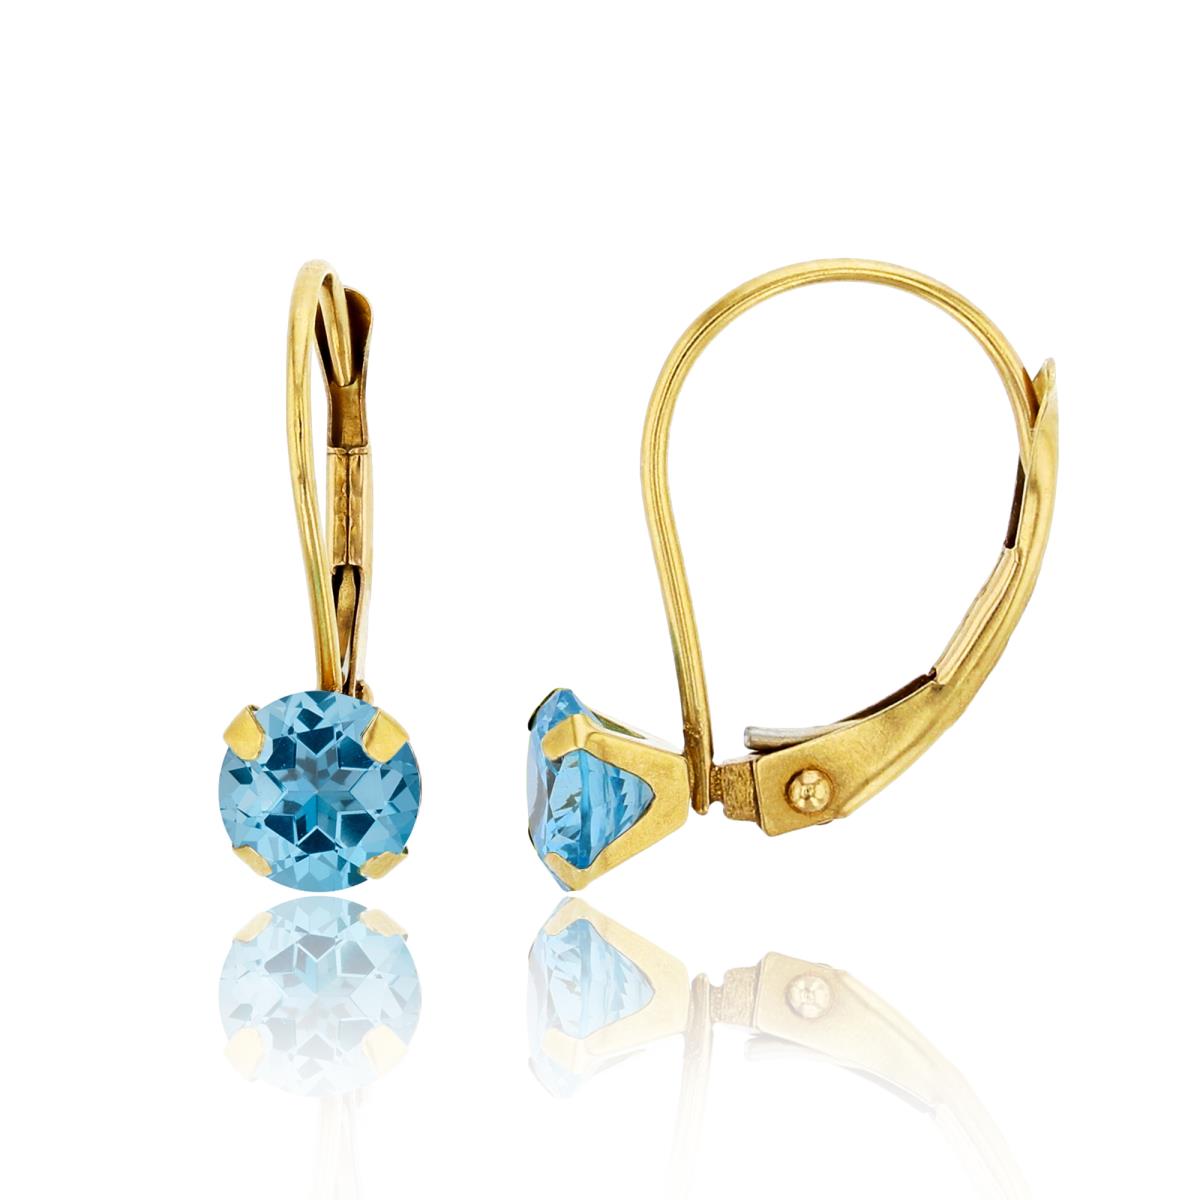 10K Yellow Gold 6.00mm Round Sky Blue Martini Leverback Earring